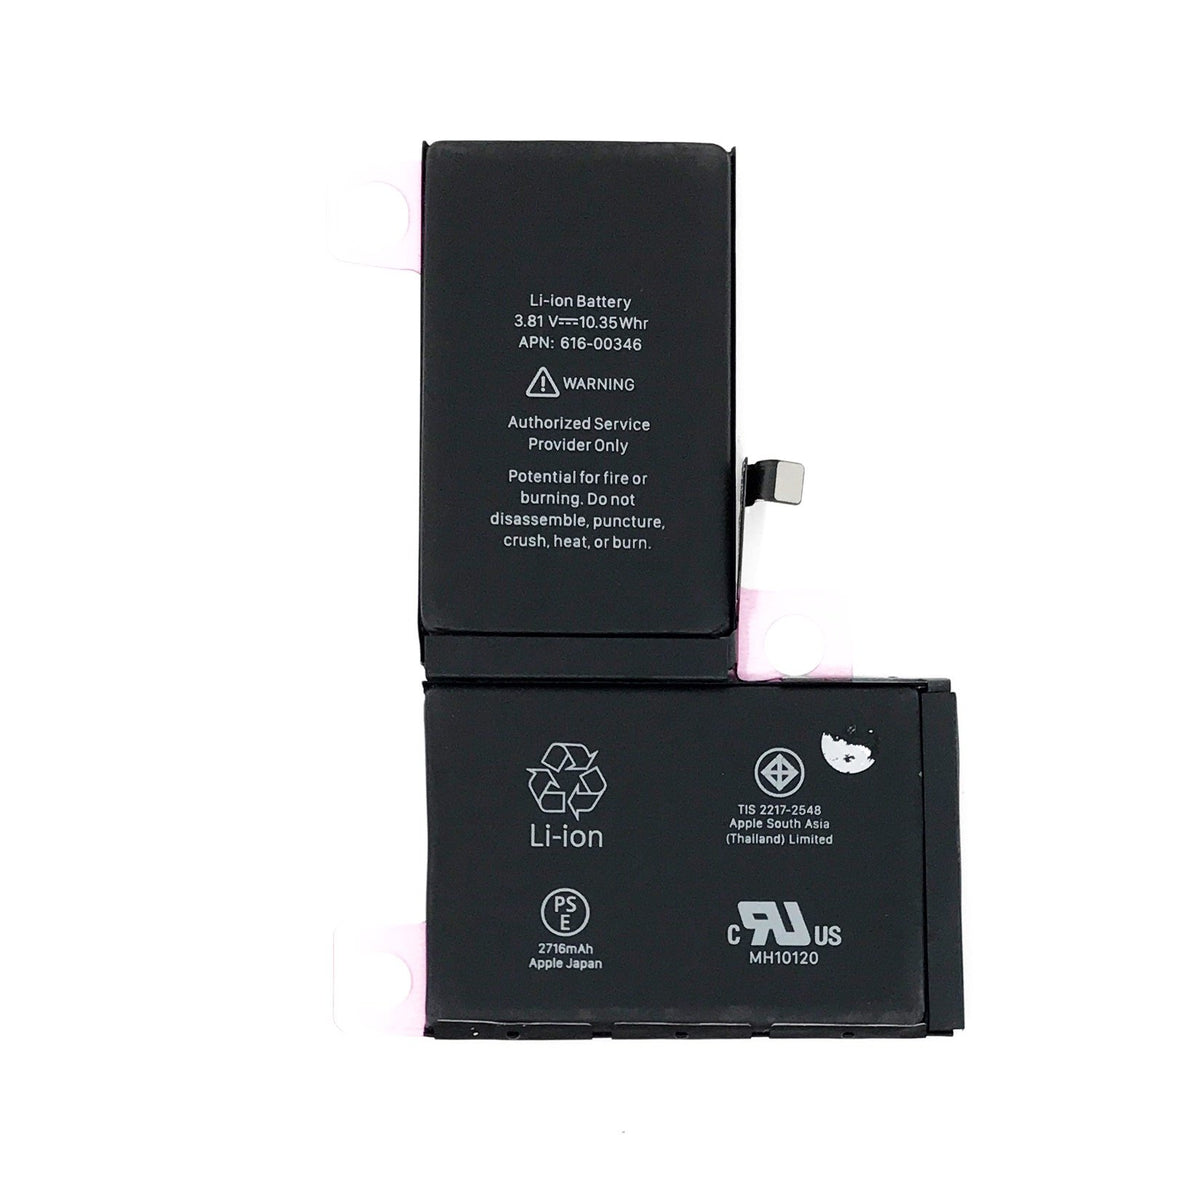 IPX-RS-BAT001 - iPhone X Battery Replacement